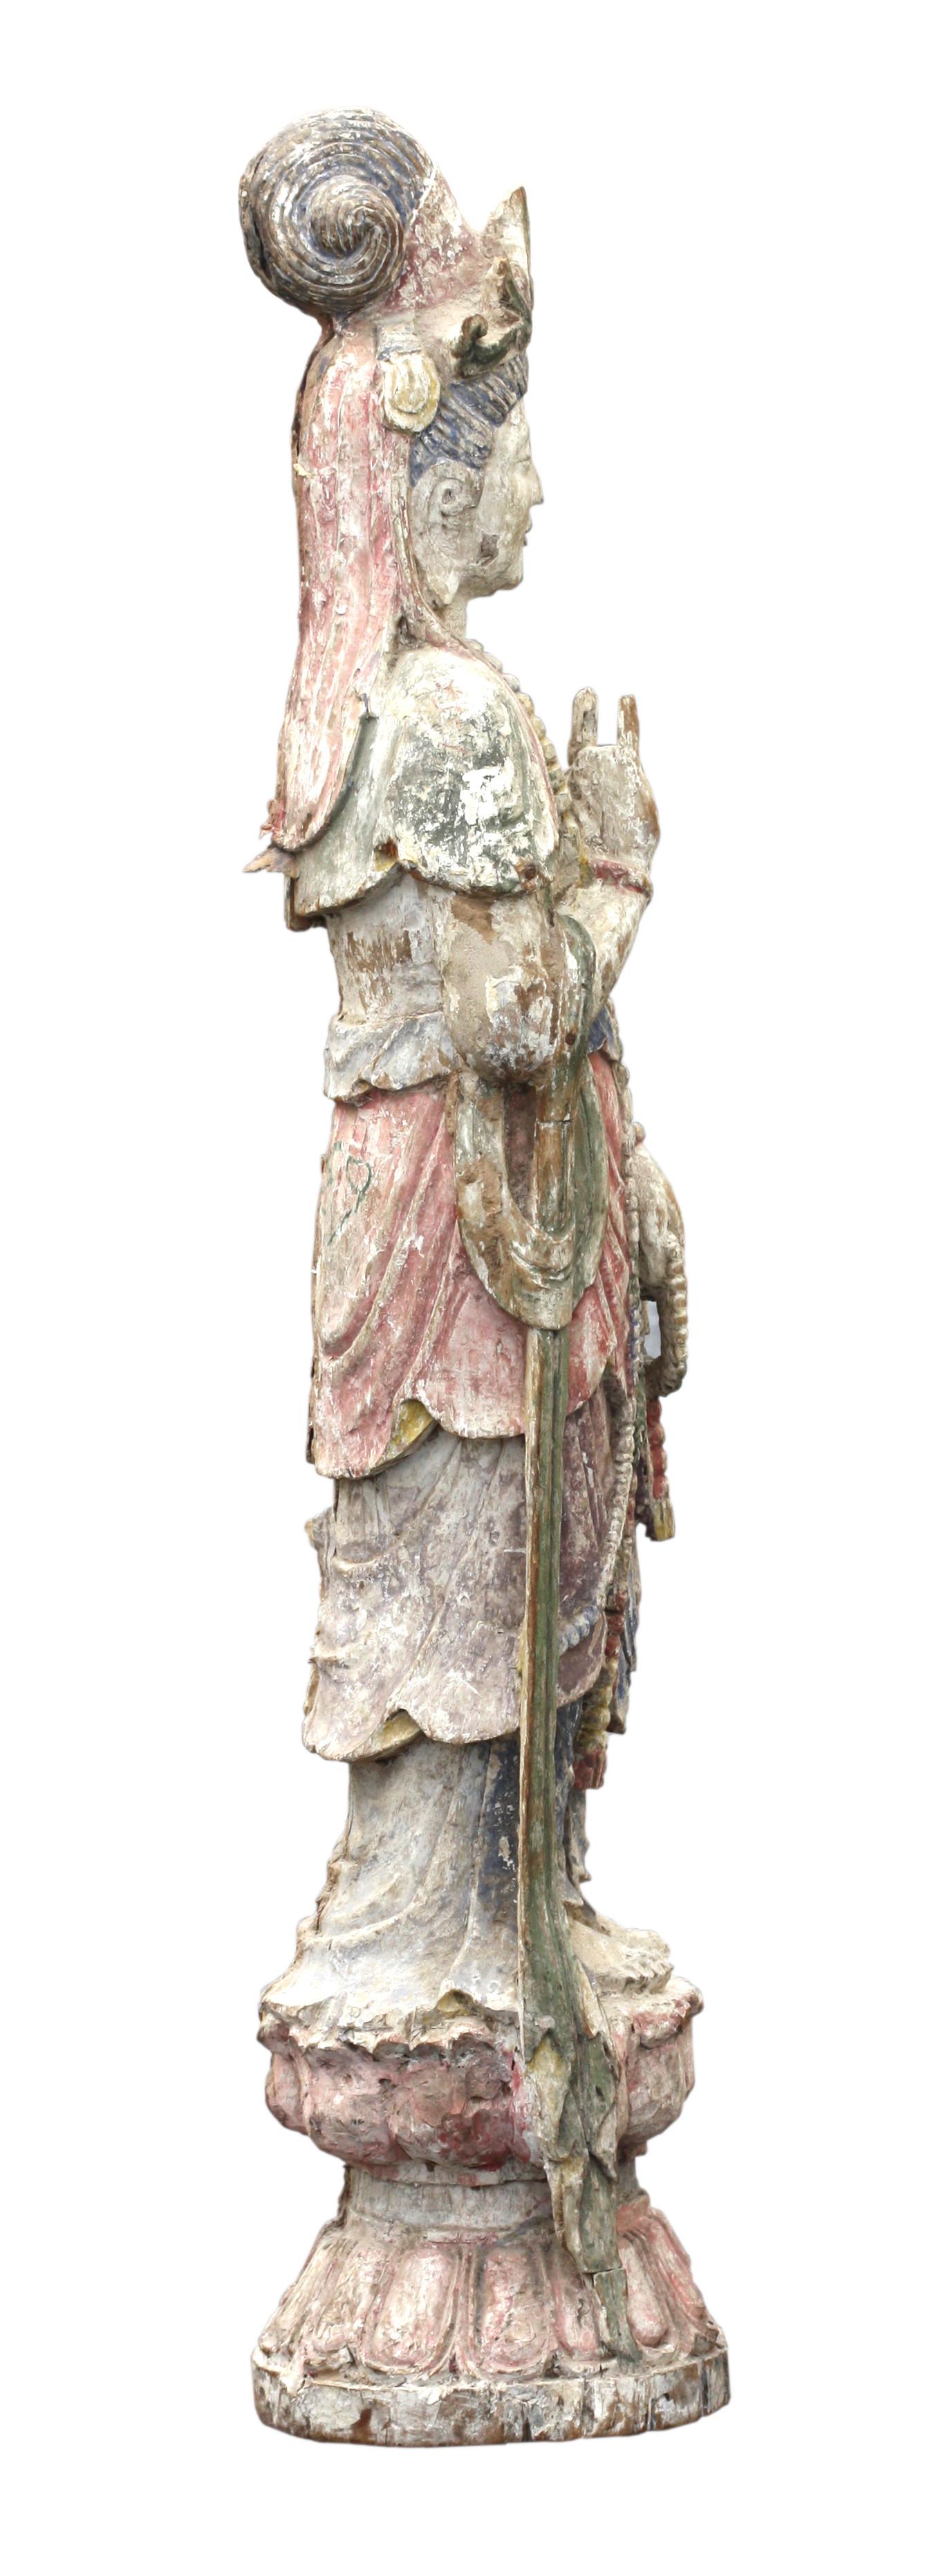 Chinese Polychrome-Decorated Carved Wood Figure of a Bodhisattva For Sale 2